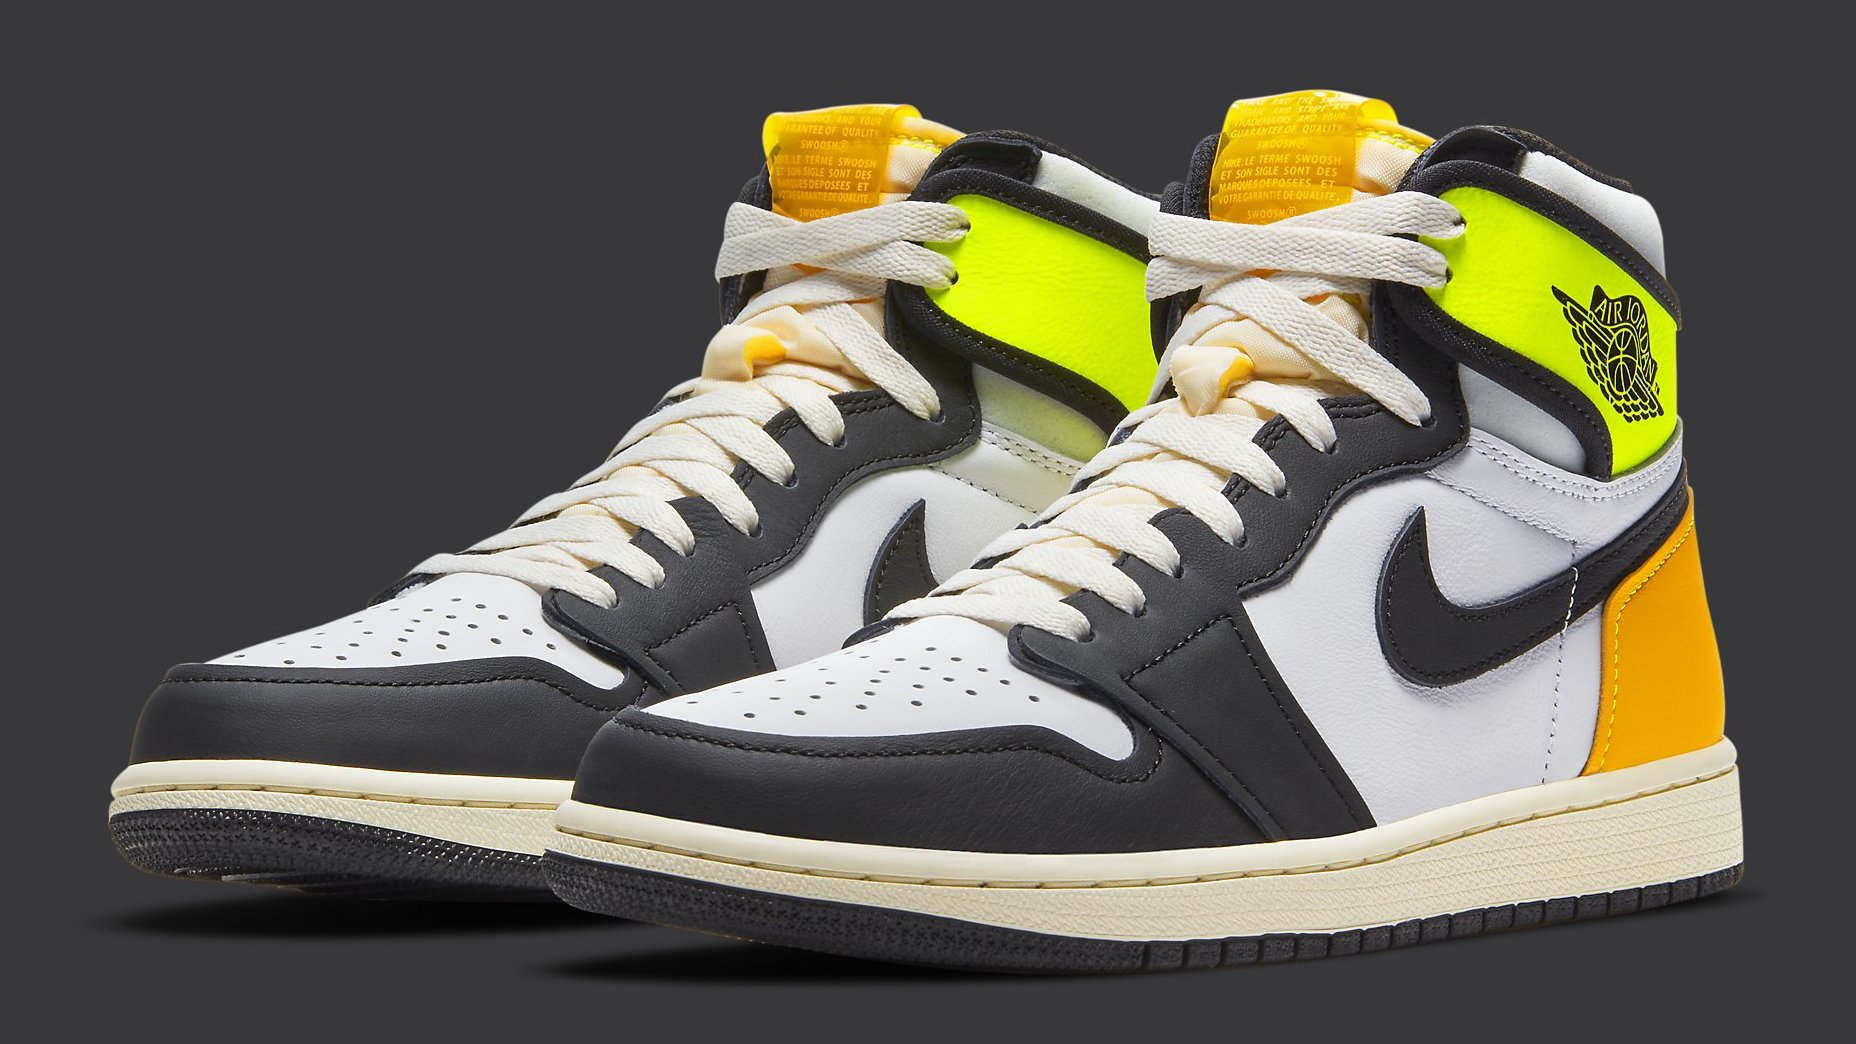 The 'Volt Gold' Air Jordan 1 High Is Releasing in Early 2021 | Complex